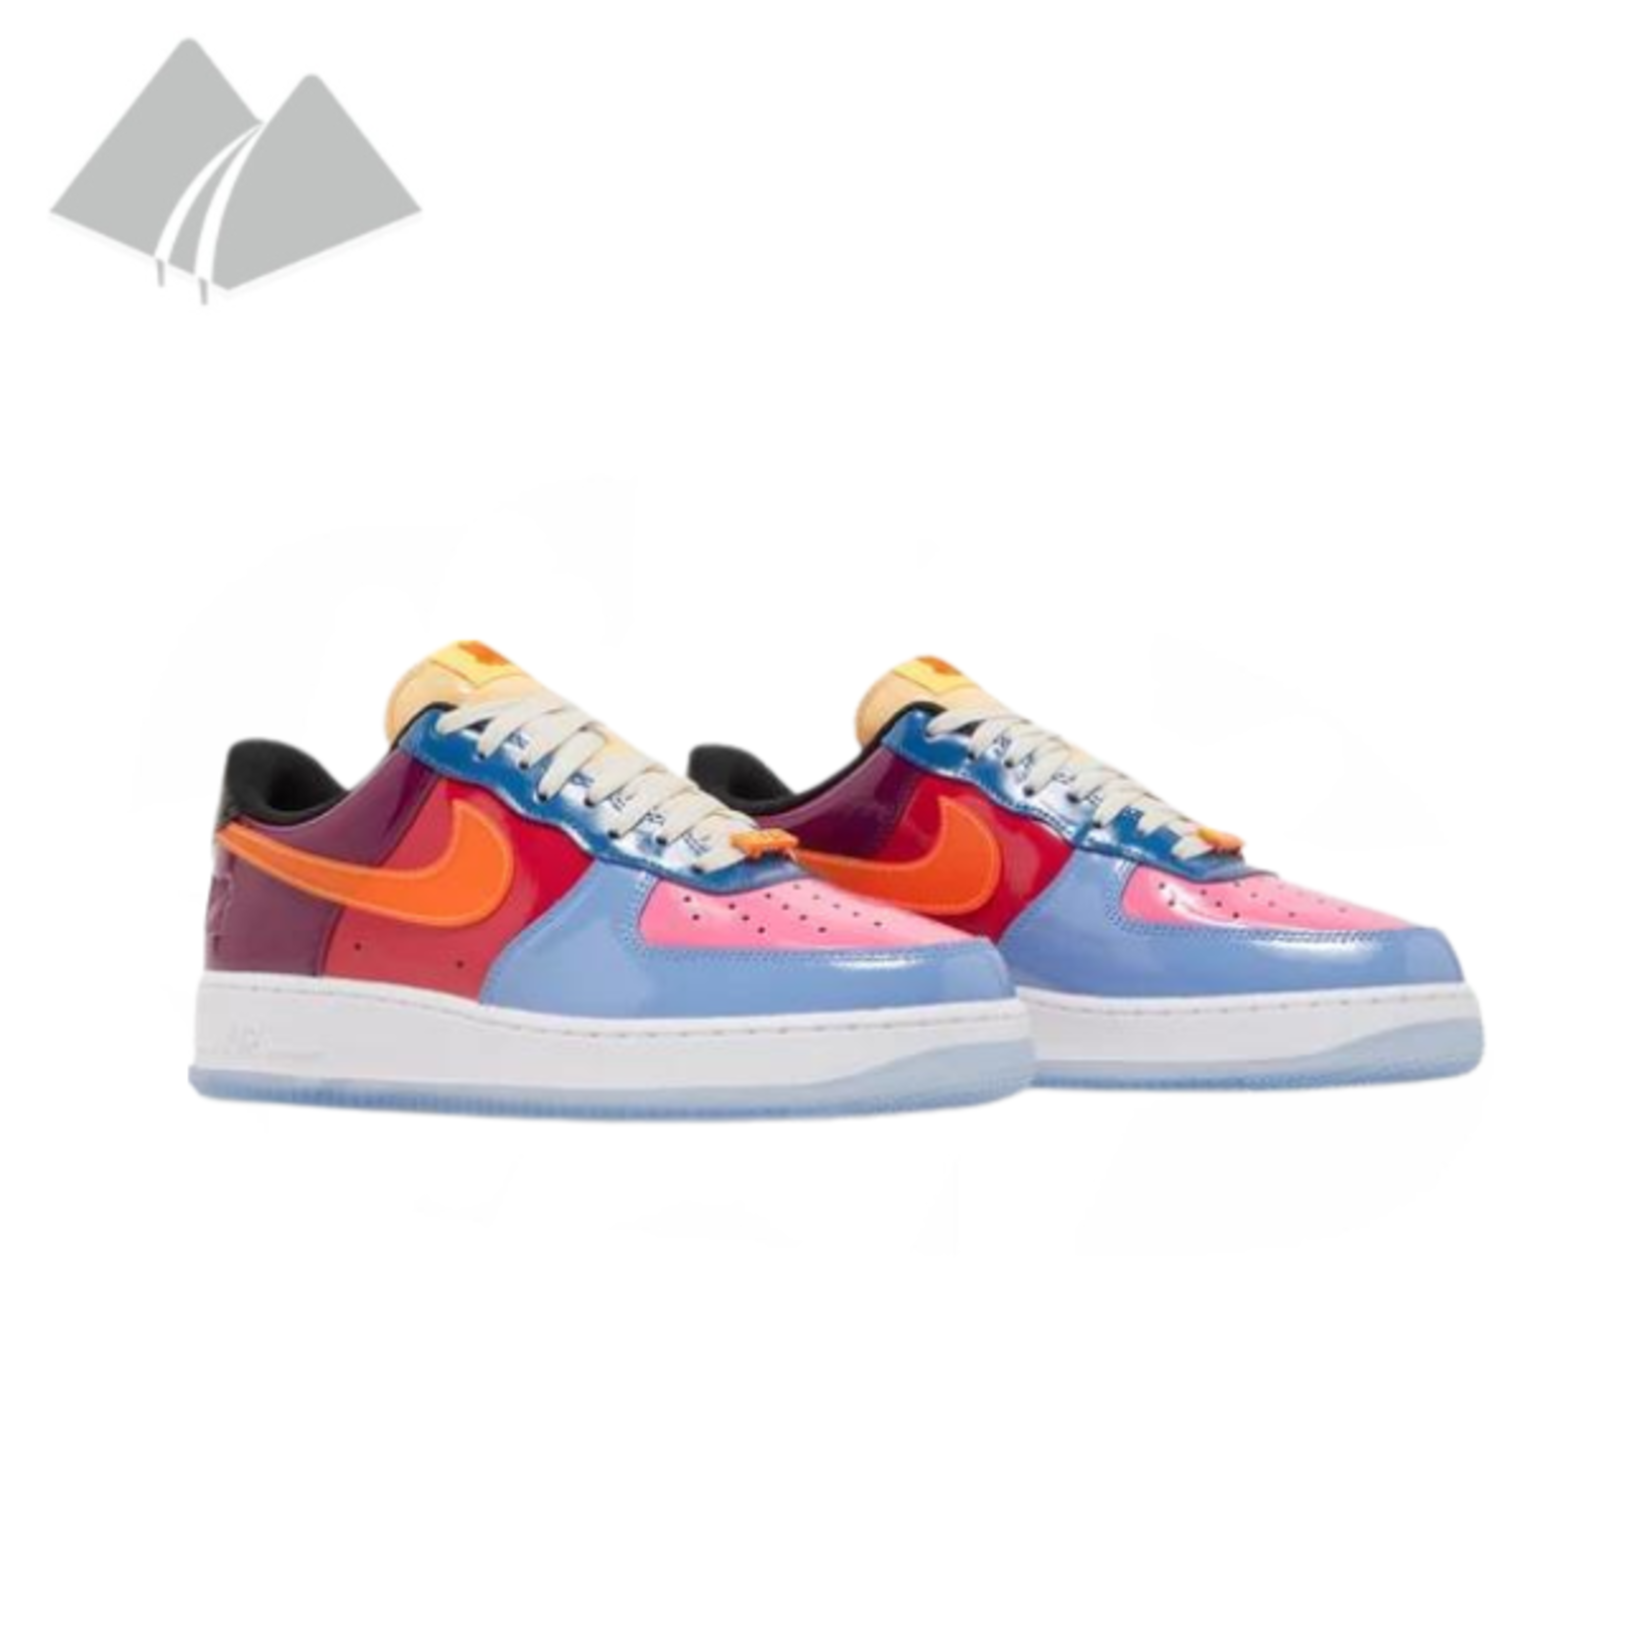 Nike Nike Air Force 1 Low (M) Undefeated Multi-Patent Total Orange